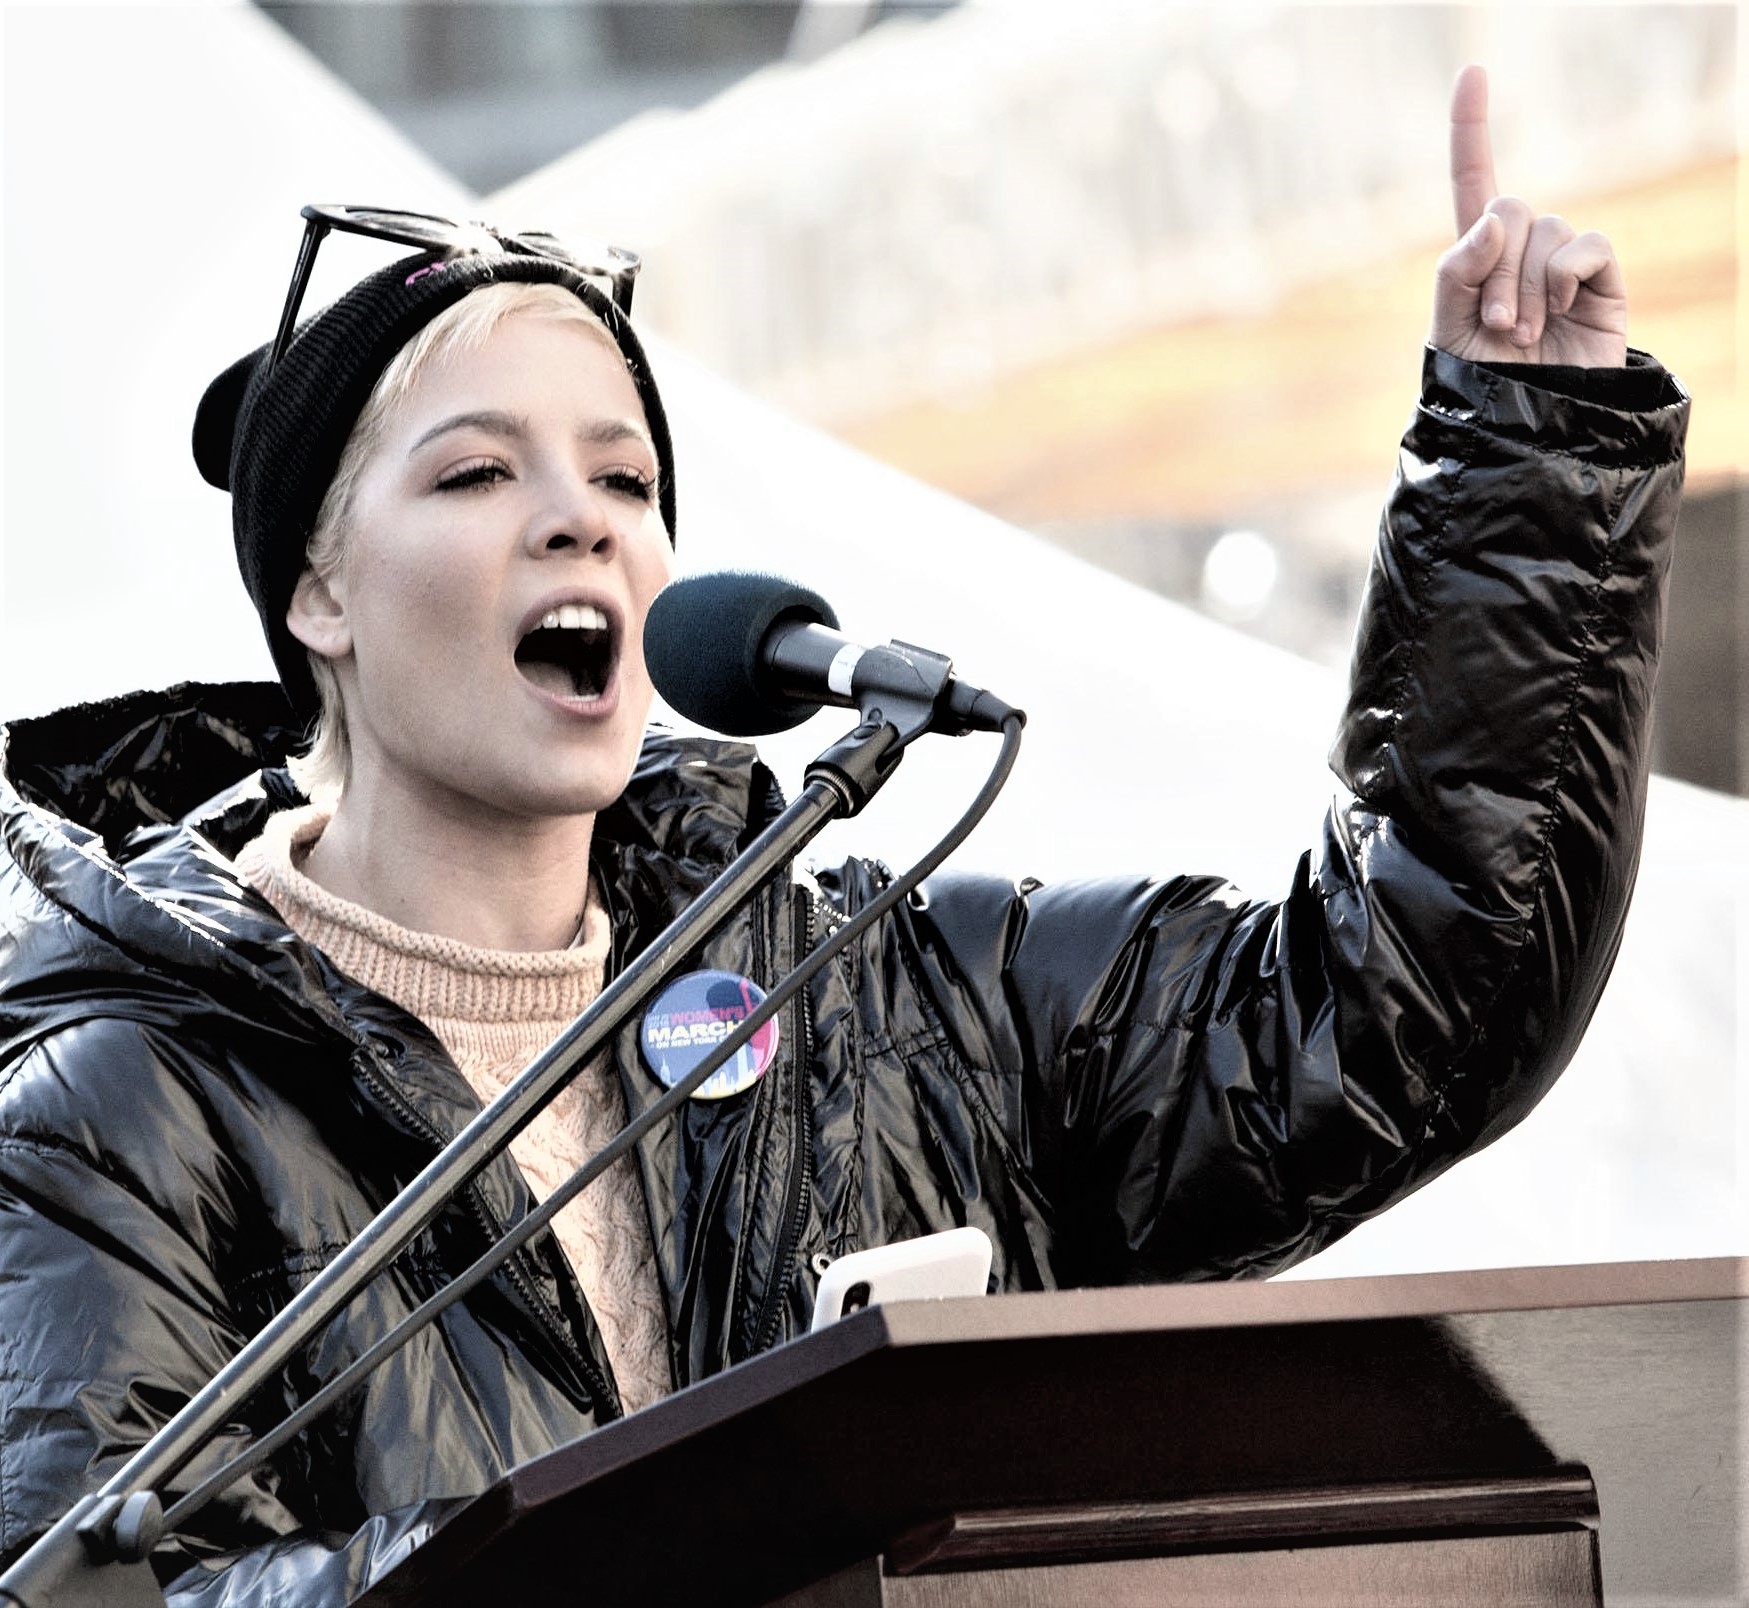 Halsey at the Women's March